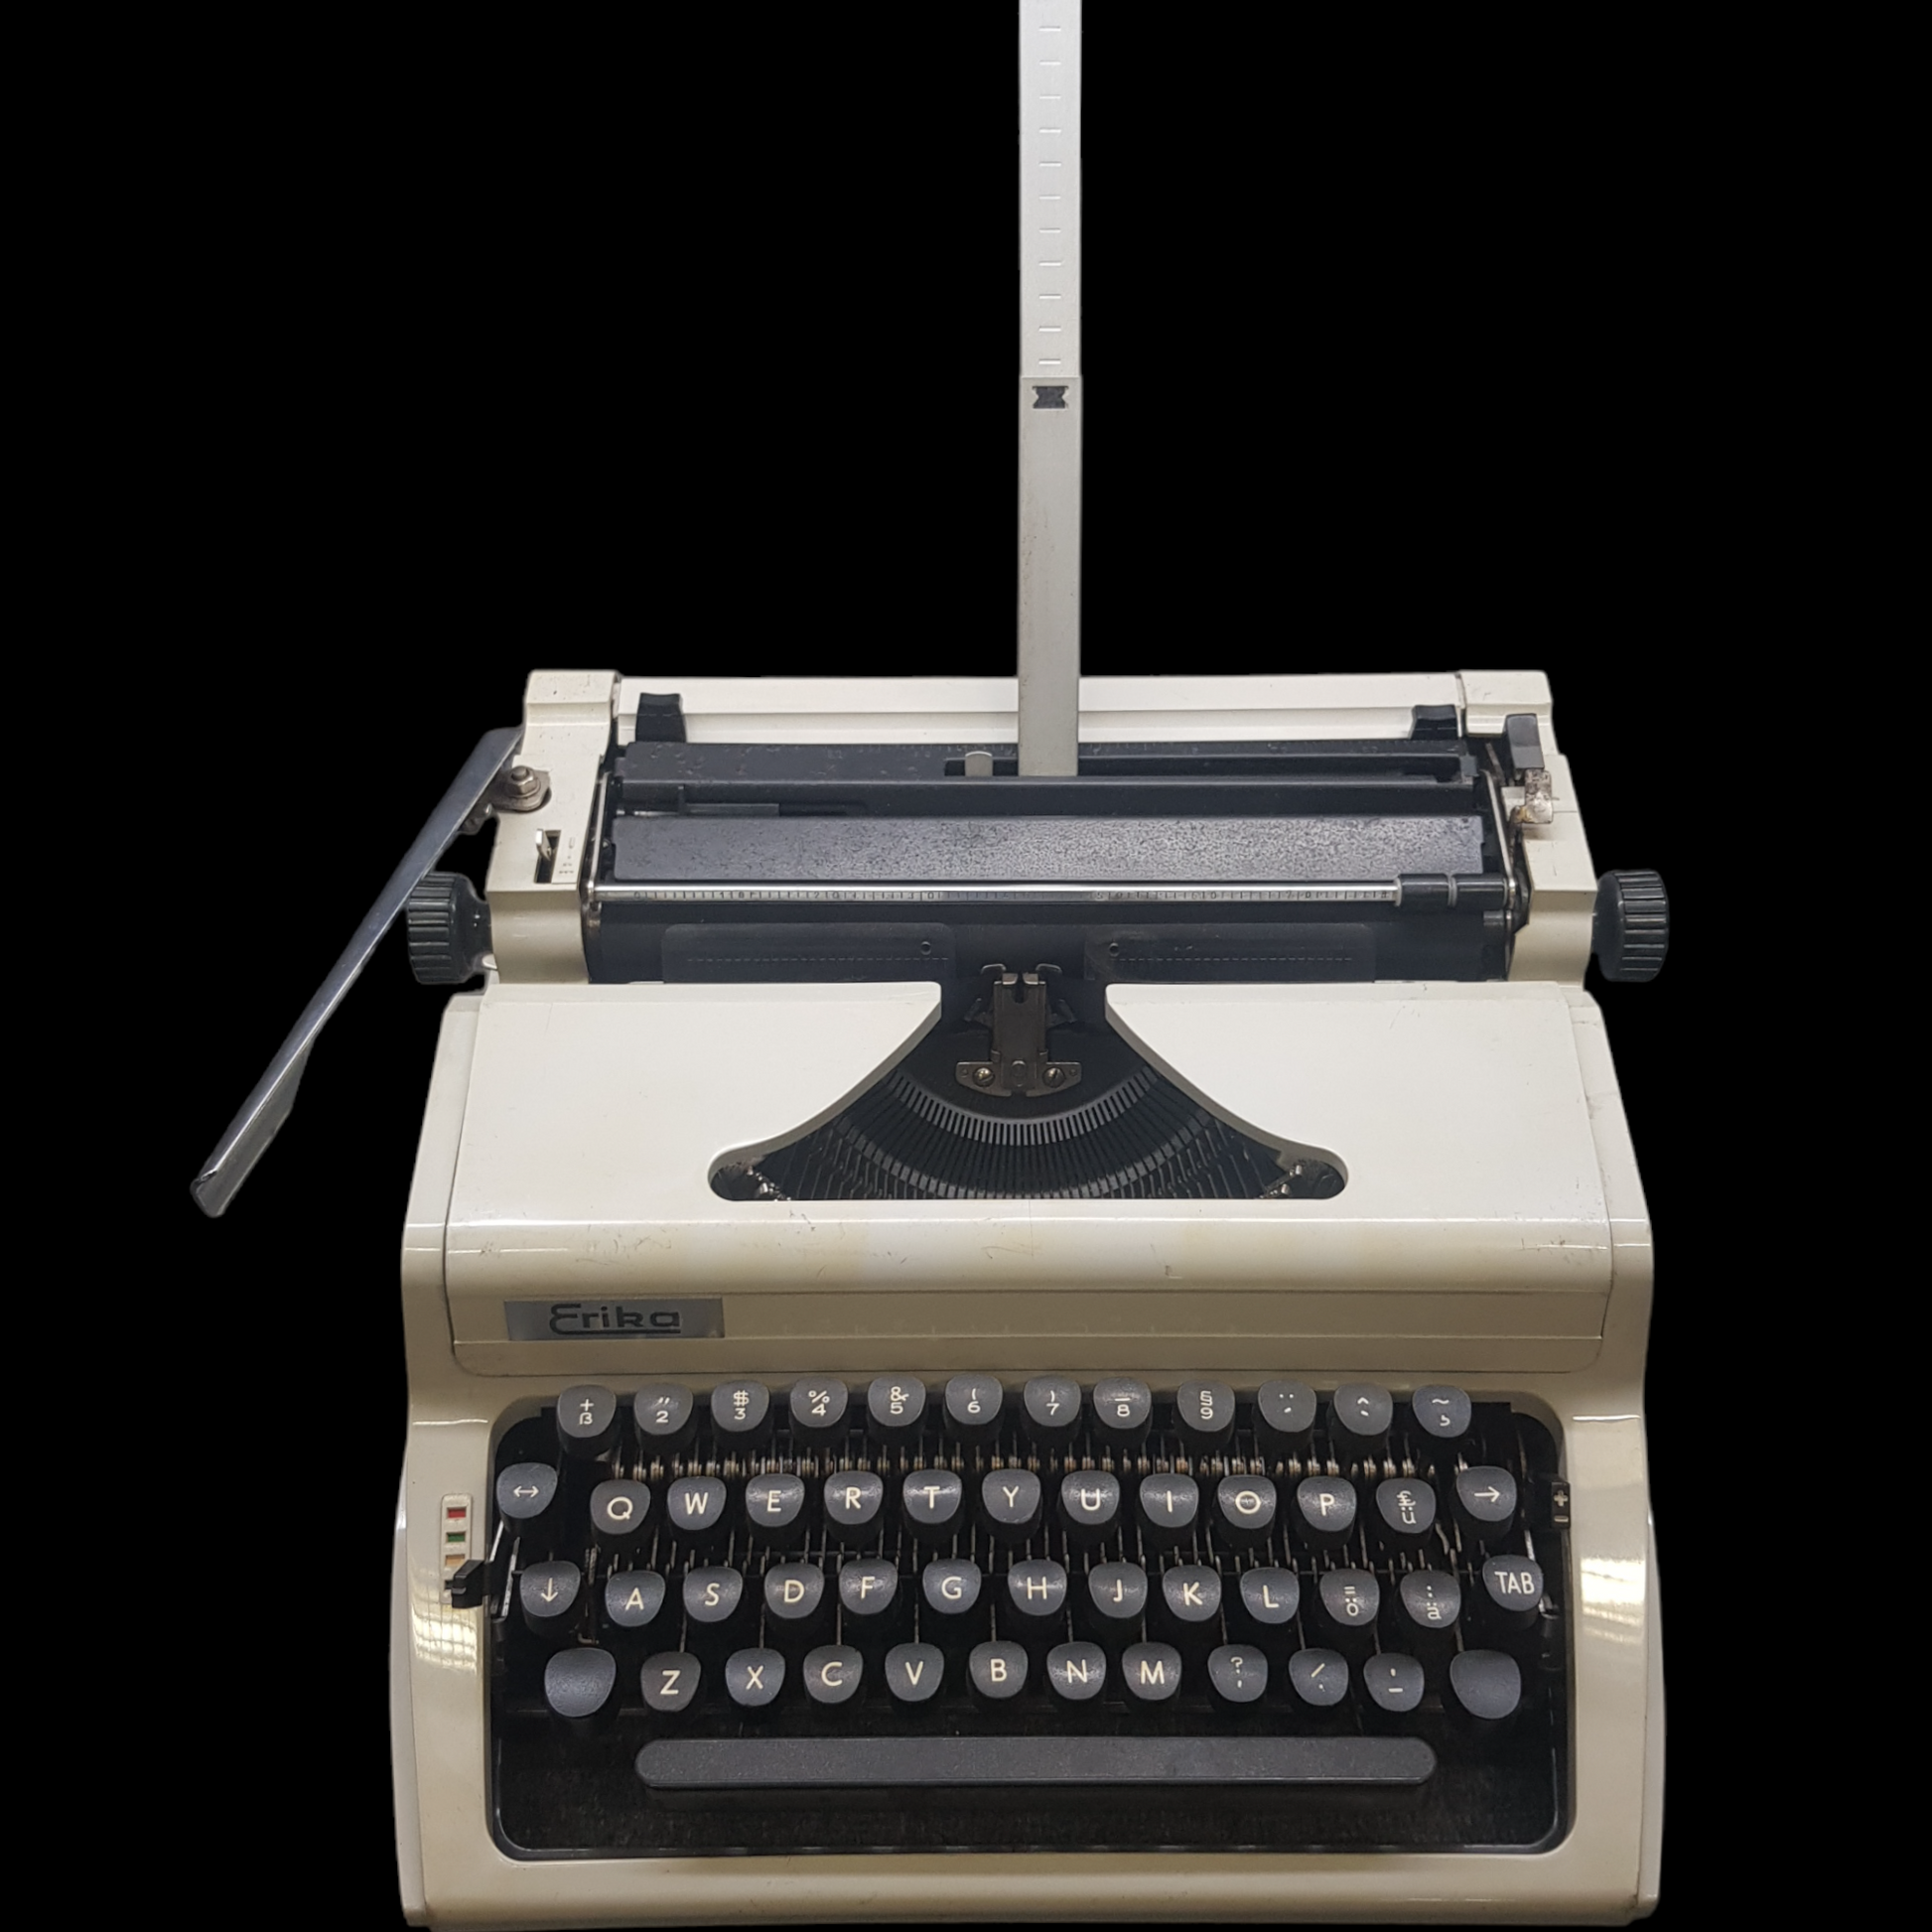 Image of Erika Model 42 Typewriter. Fibre body. Made in Germany. Available from universaltypewritercompany.in.